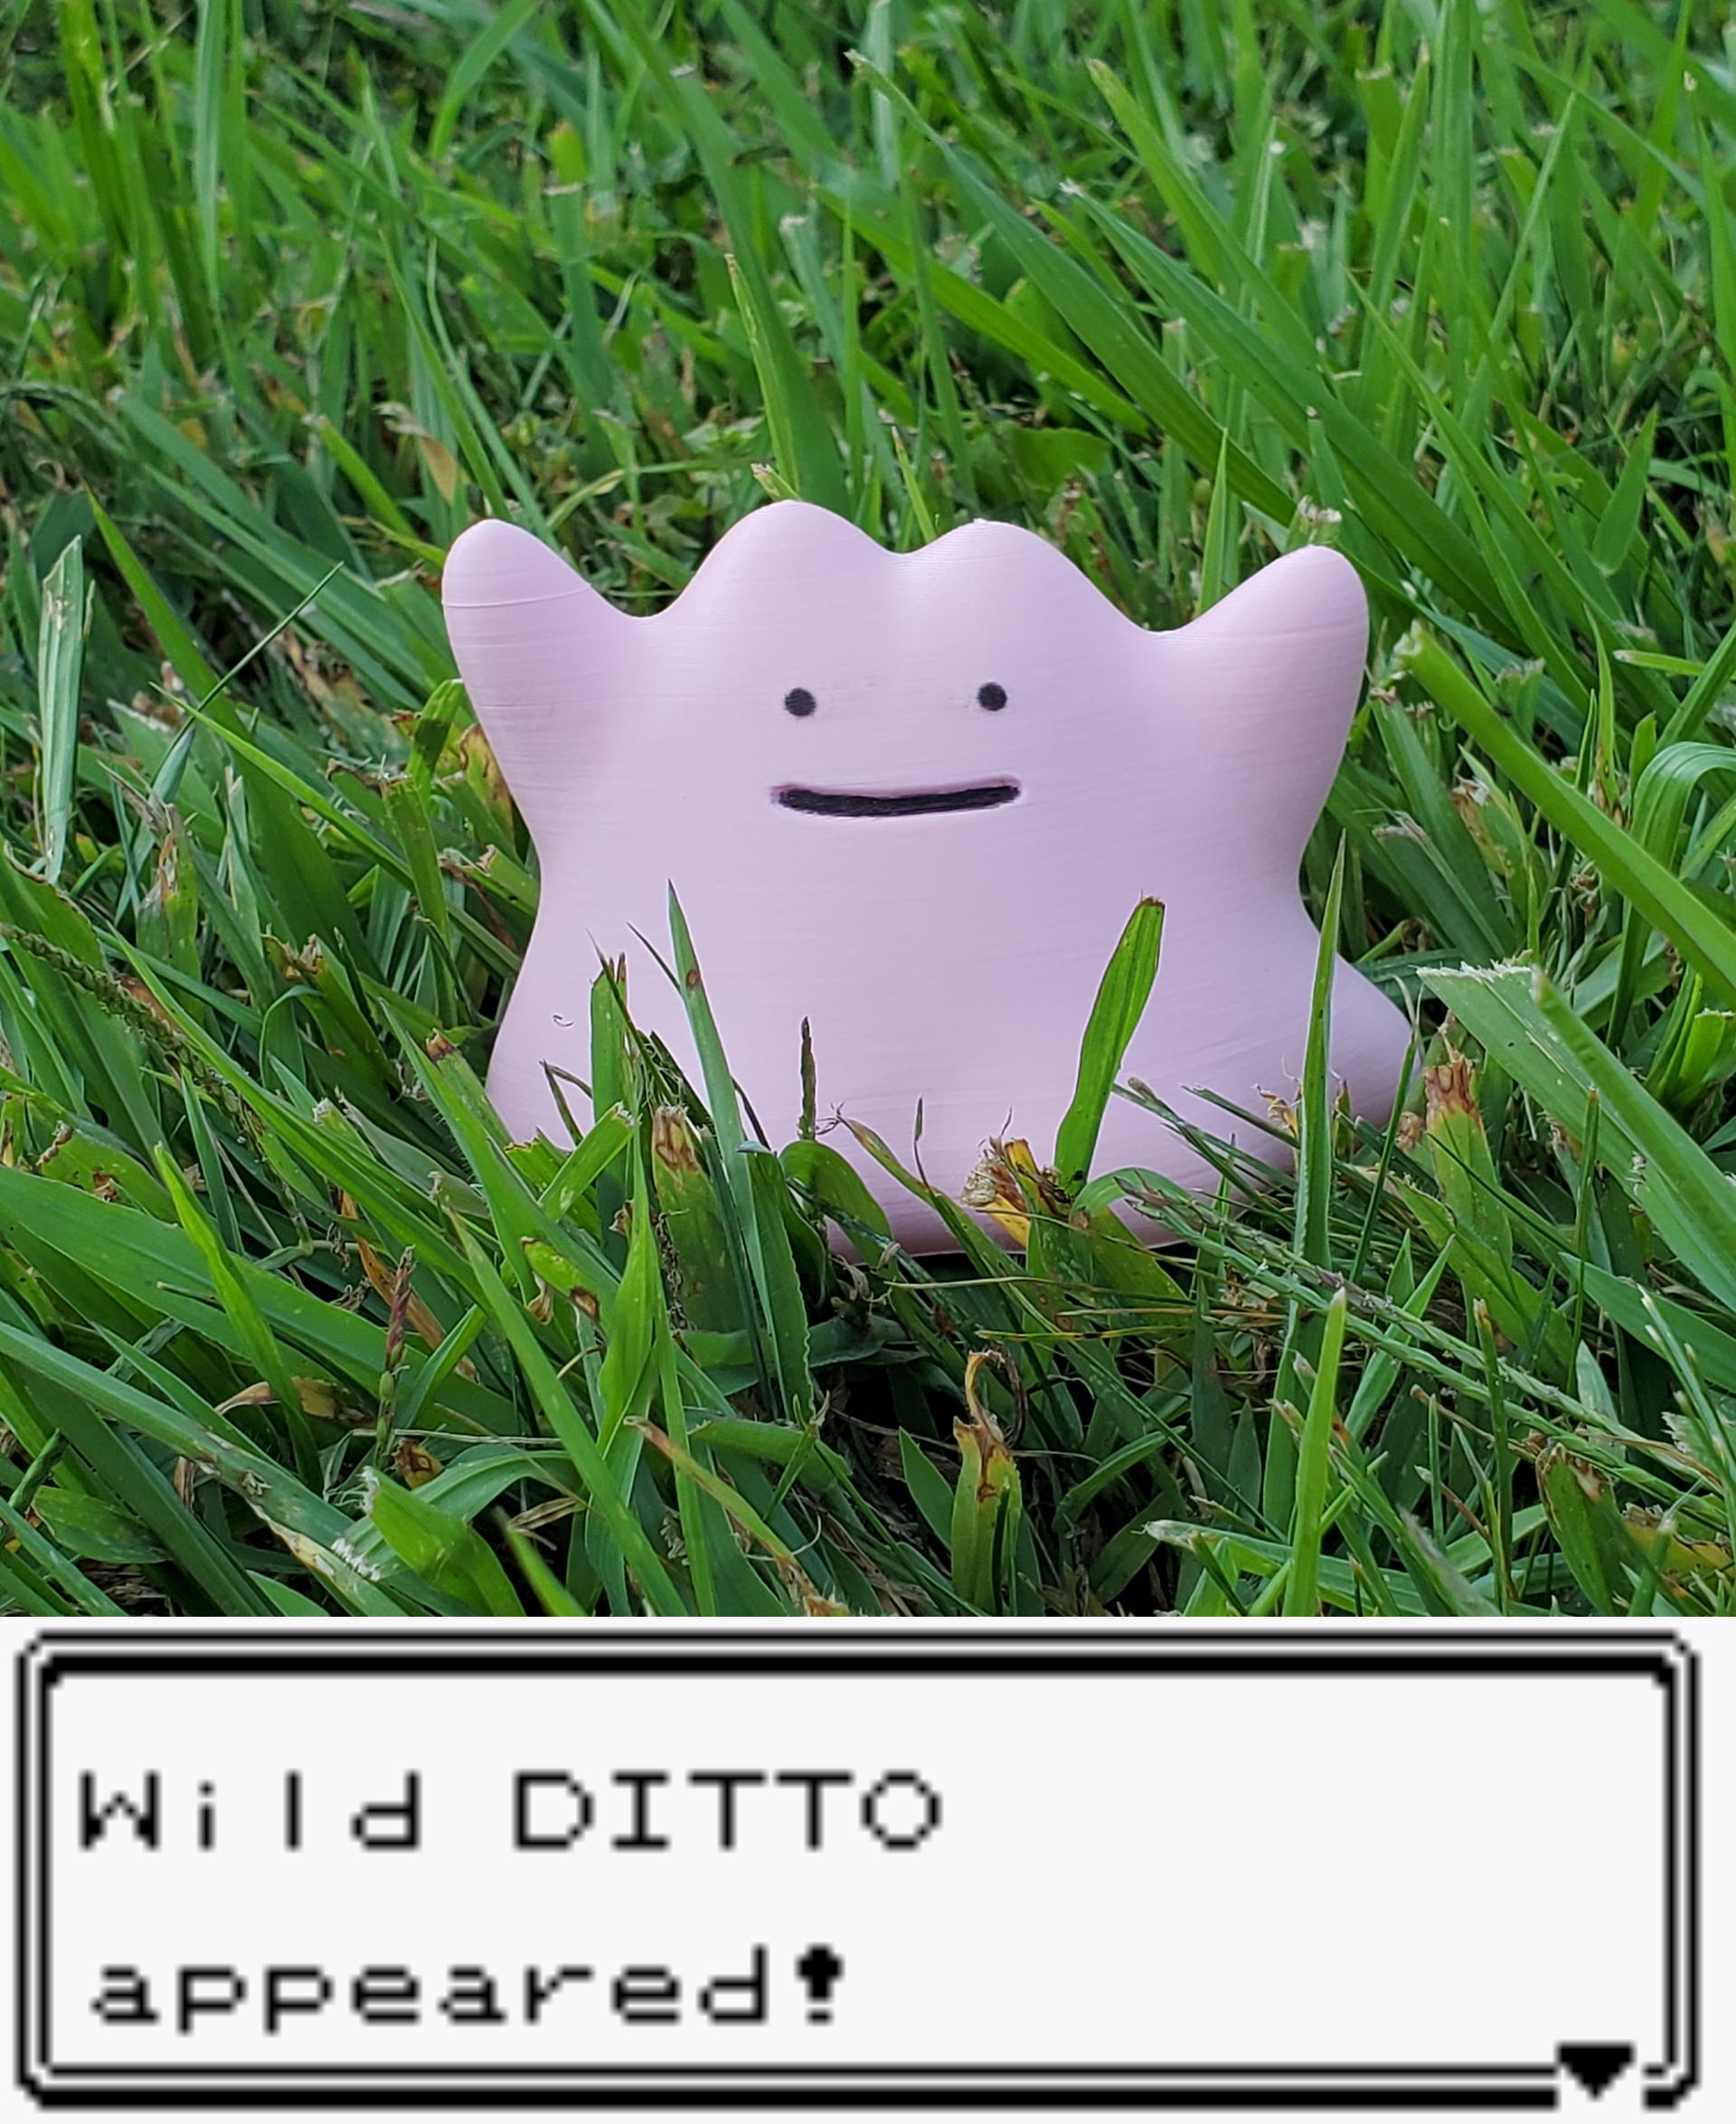 Pokemon Ditto #132 - Optimized for 3D Printing - Great model! Looks so good, prints really well. Will definitely have to reprint this as a shiny Ditto when I get the right filament.

Printed on an Artillery Sidewinder X4 Pro in Overture Cream Pink PLA - 3d model